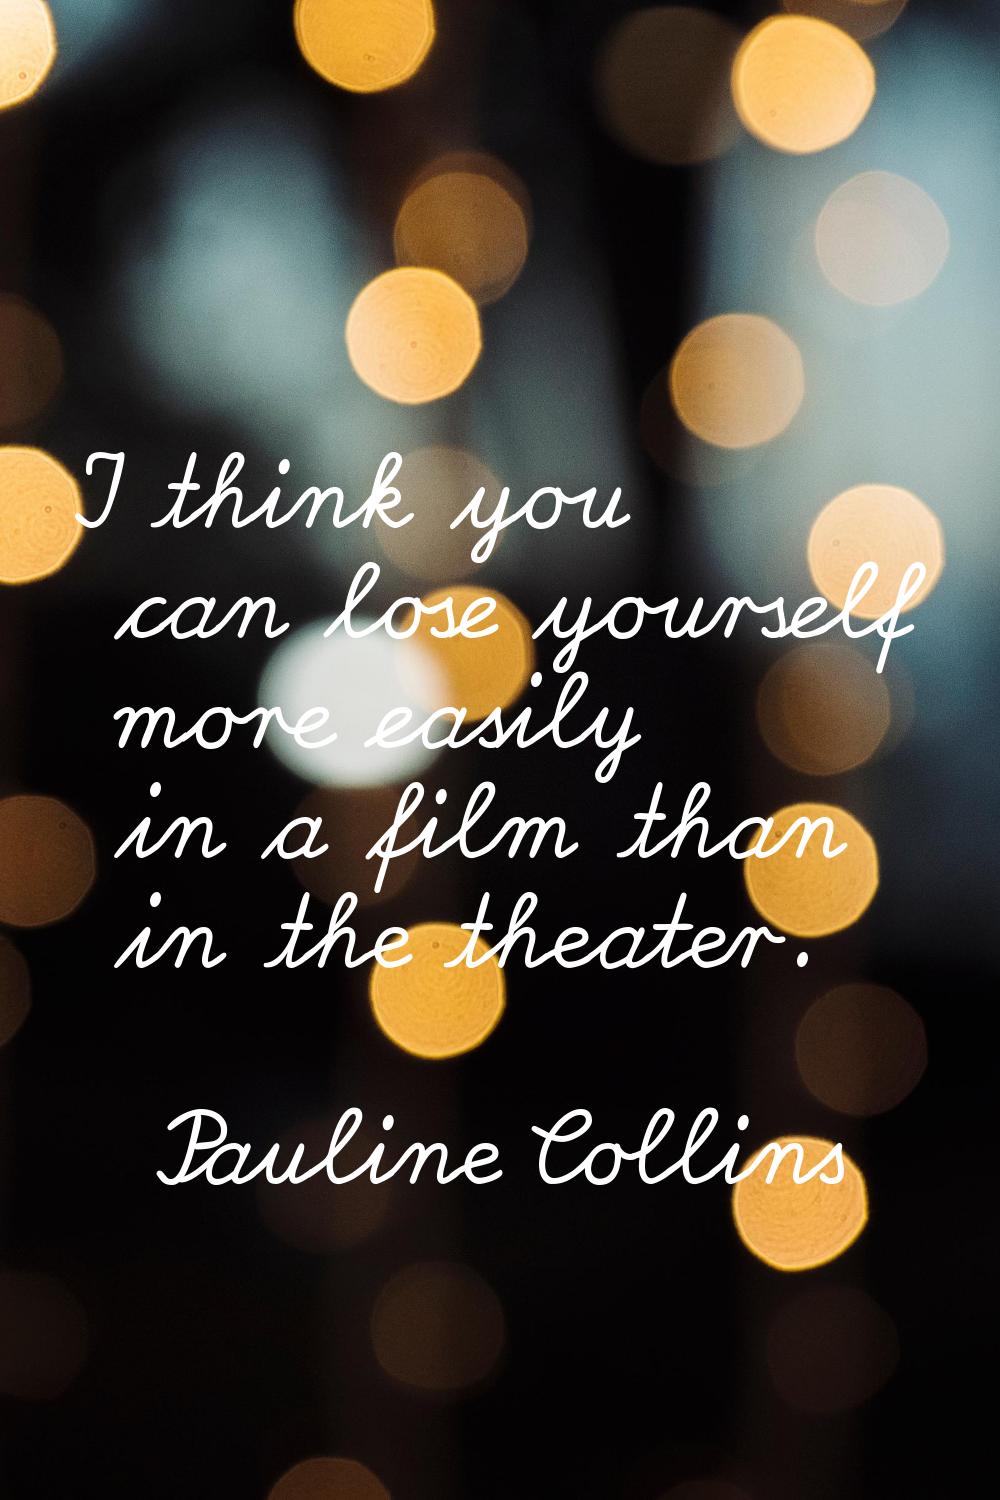 I think you can lose yourself more easily in a film than in the theater.